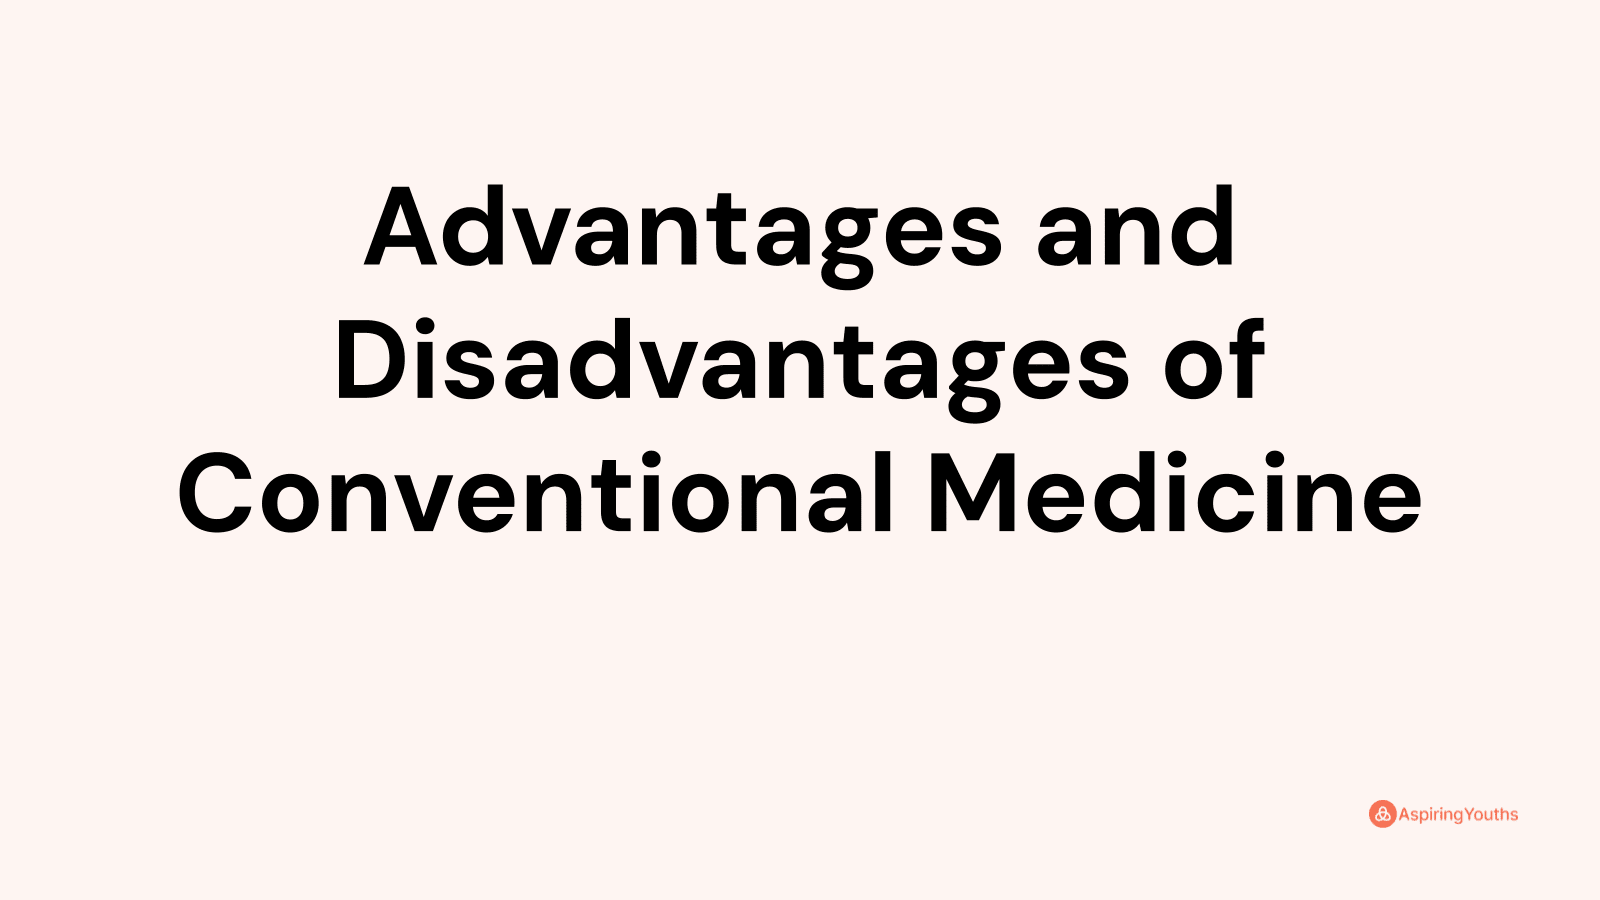 Advantages and disadvantages of Conventional Medicine